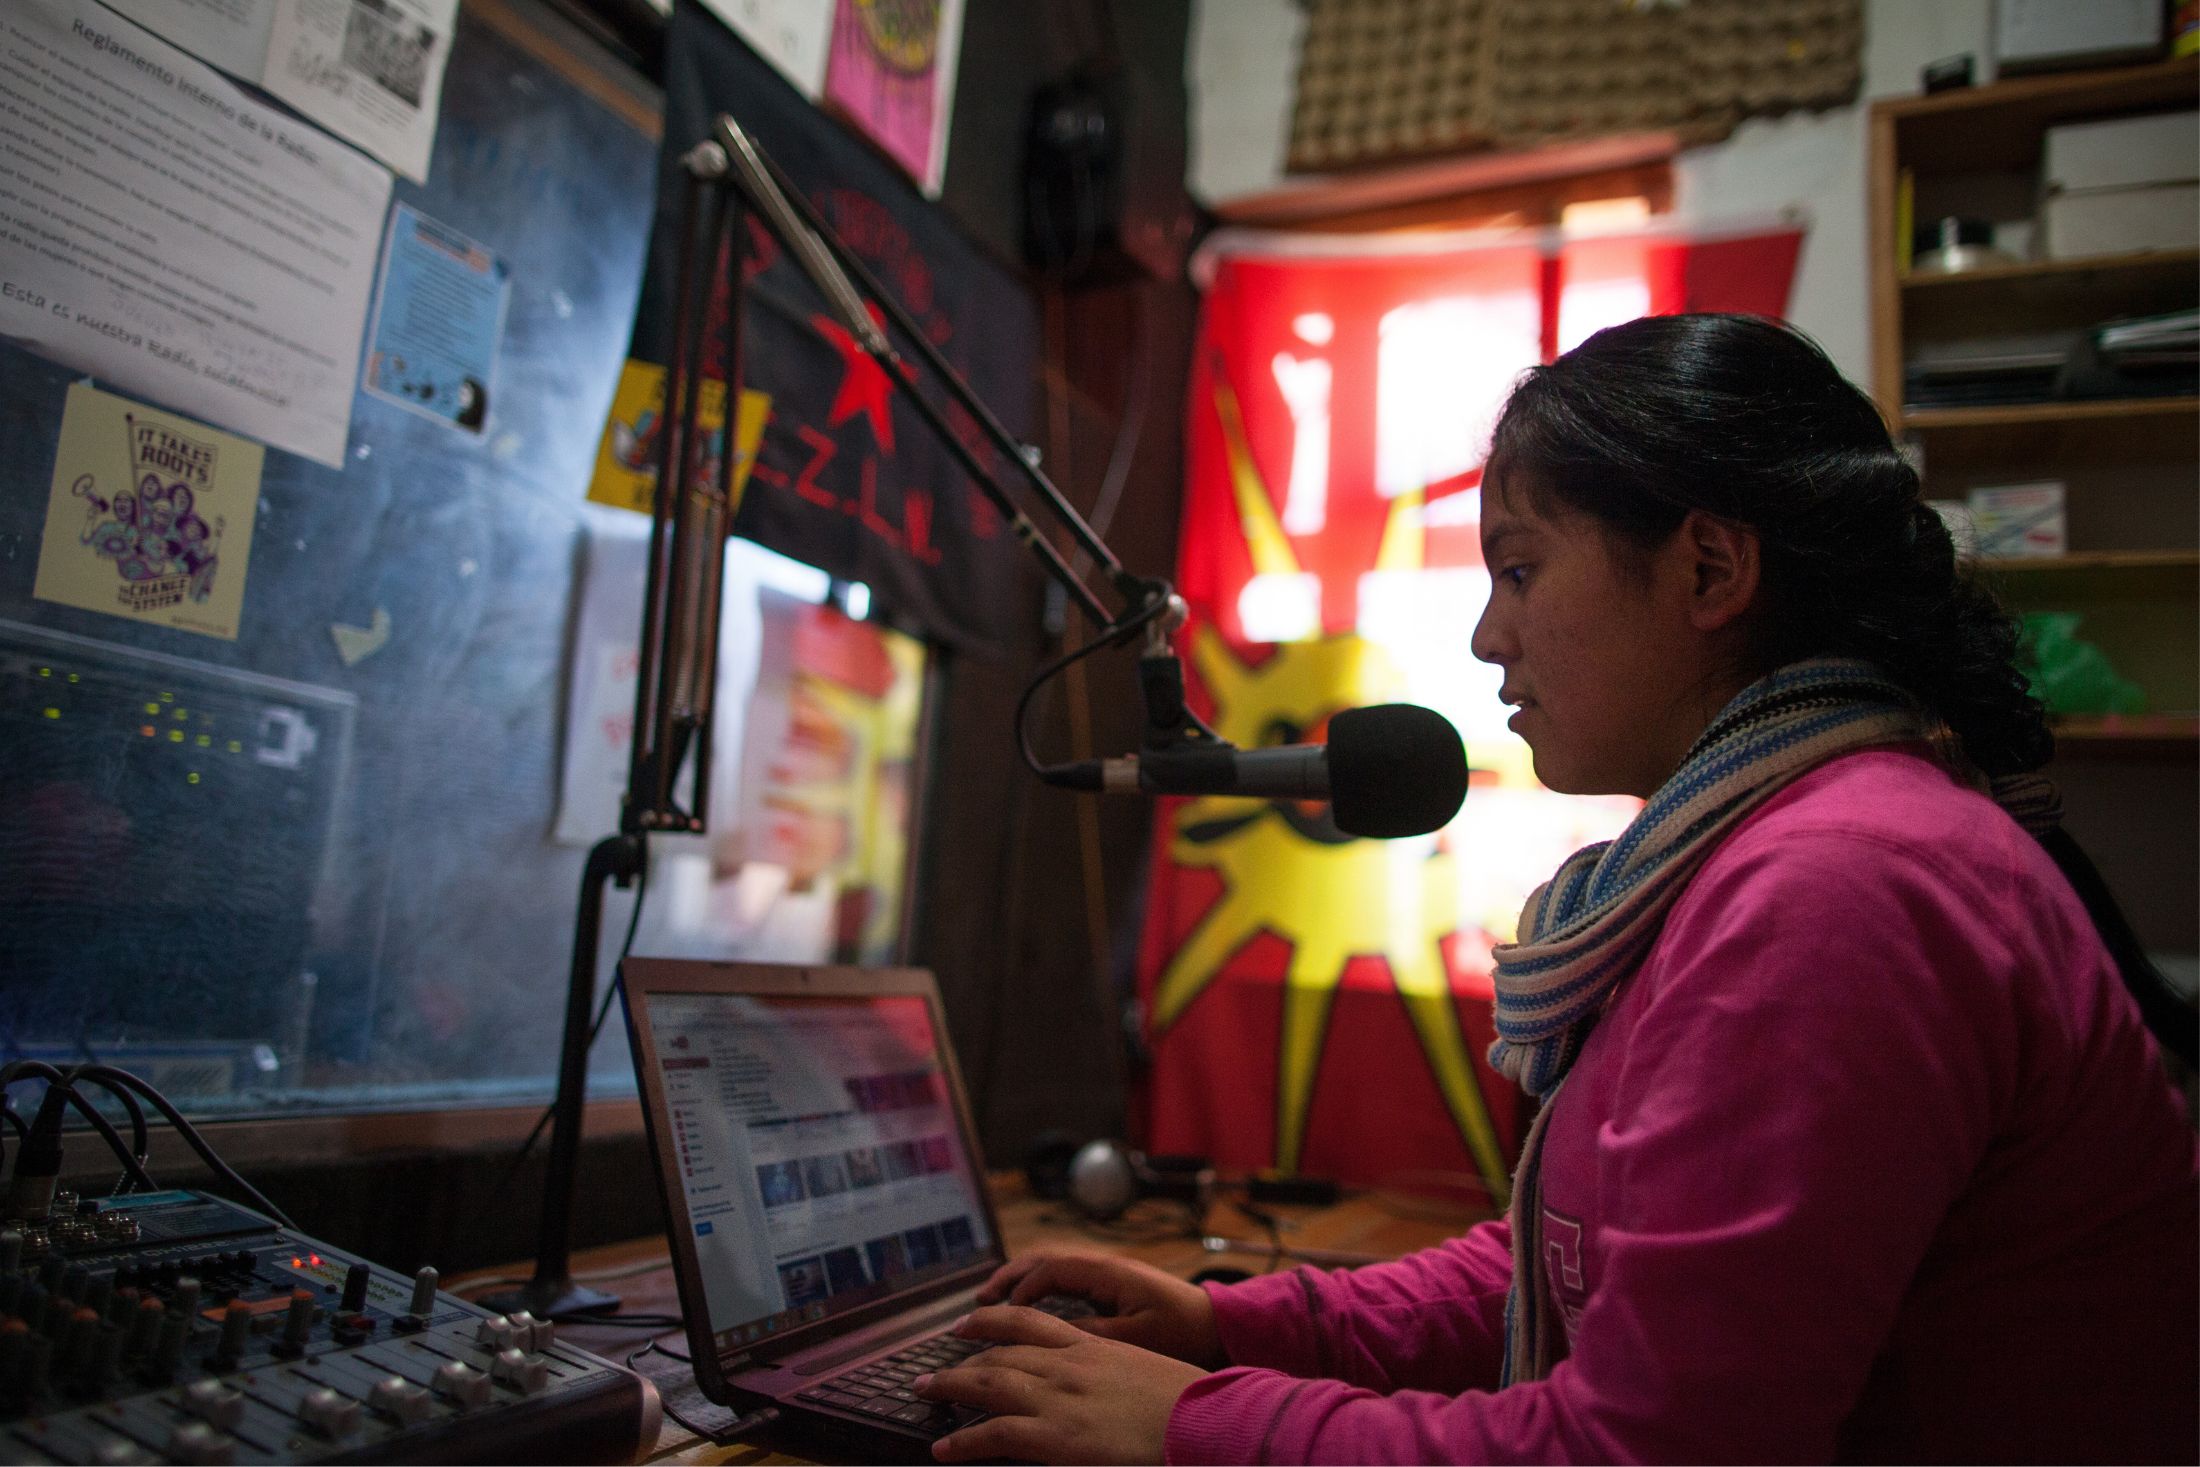 A young women of the Lenca nation in Honduras sits at a radio console and speaks into a microphone while working on a laptop